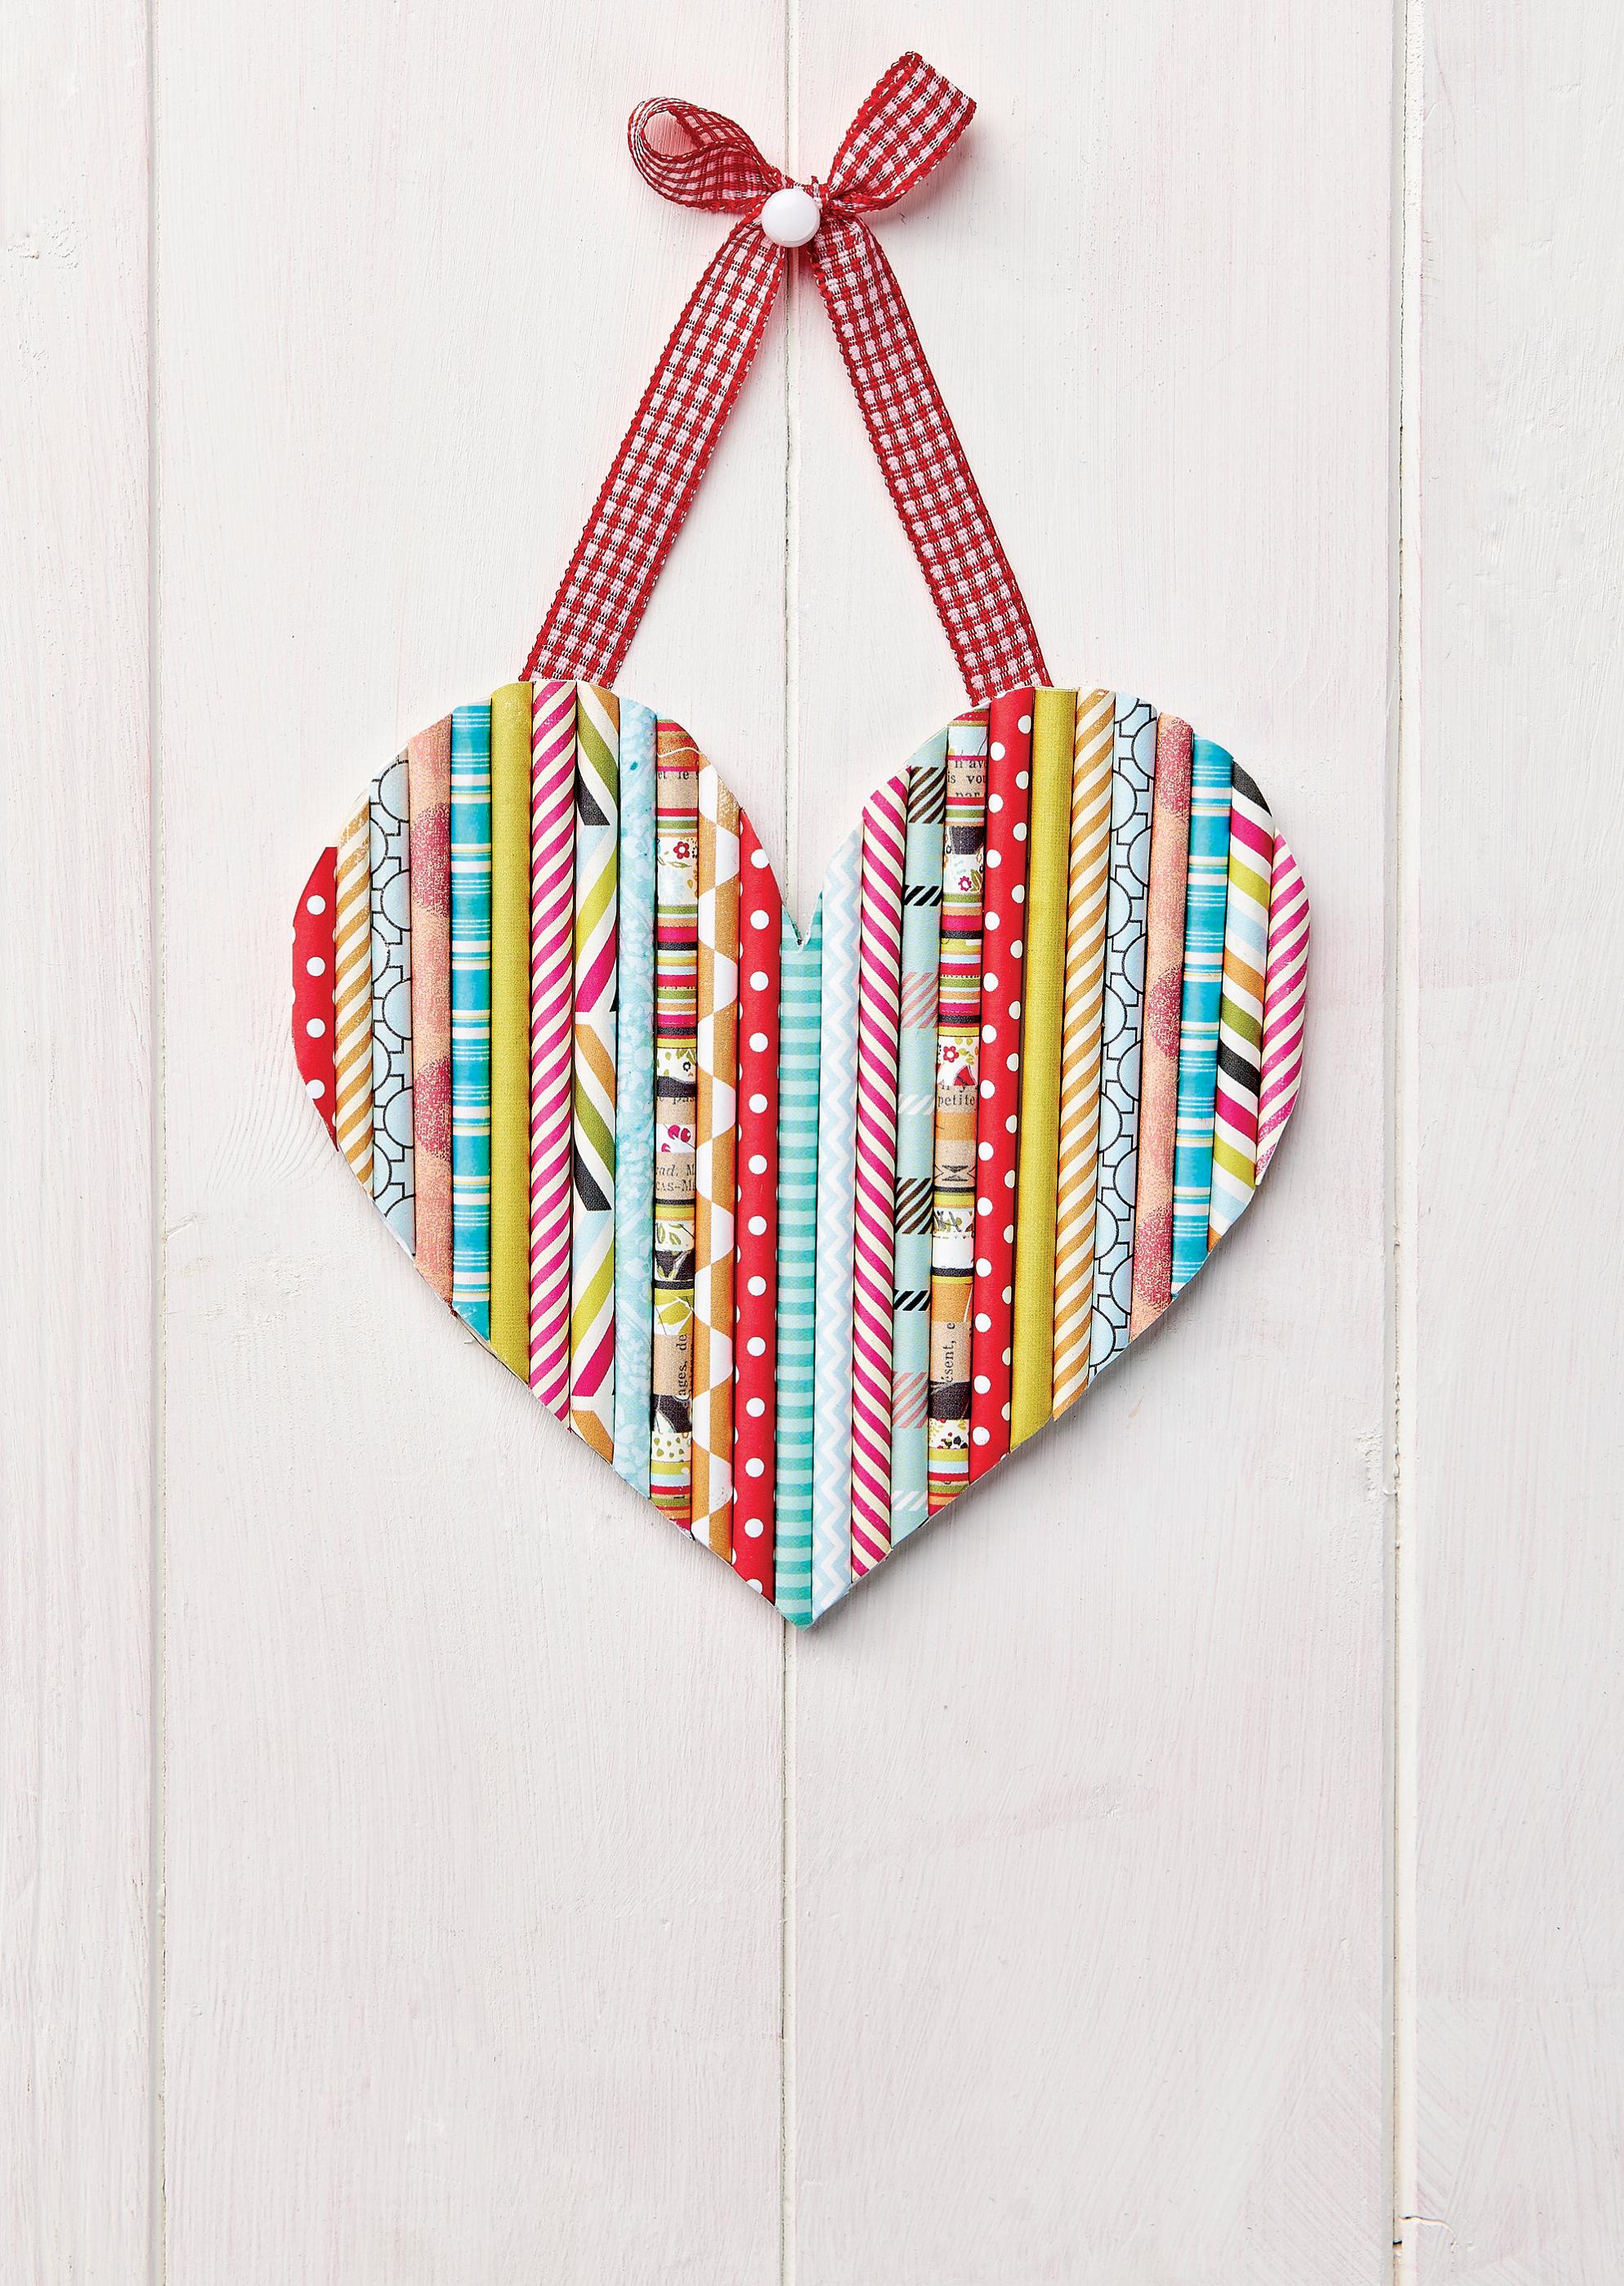 Paper straw heart PaperCrafter project